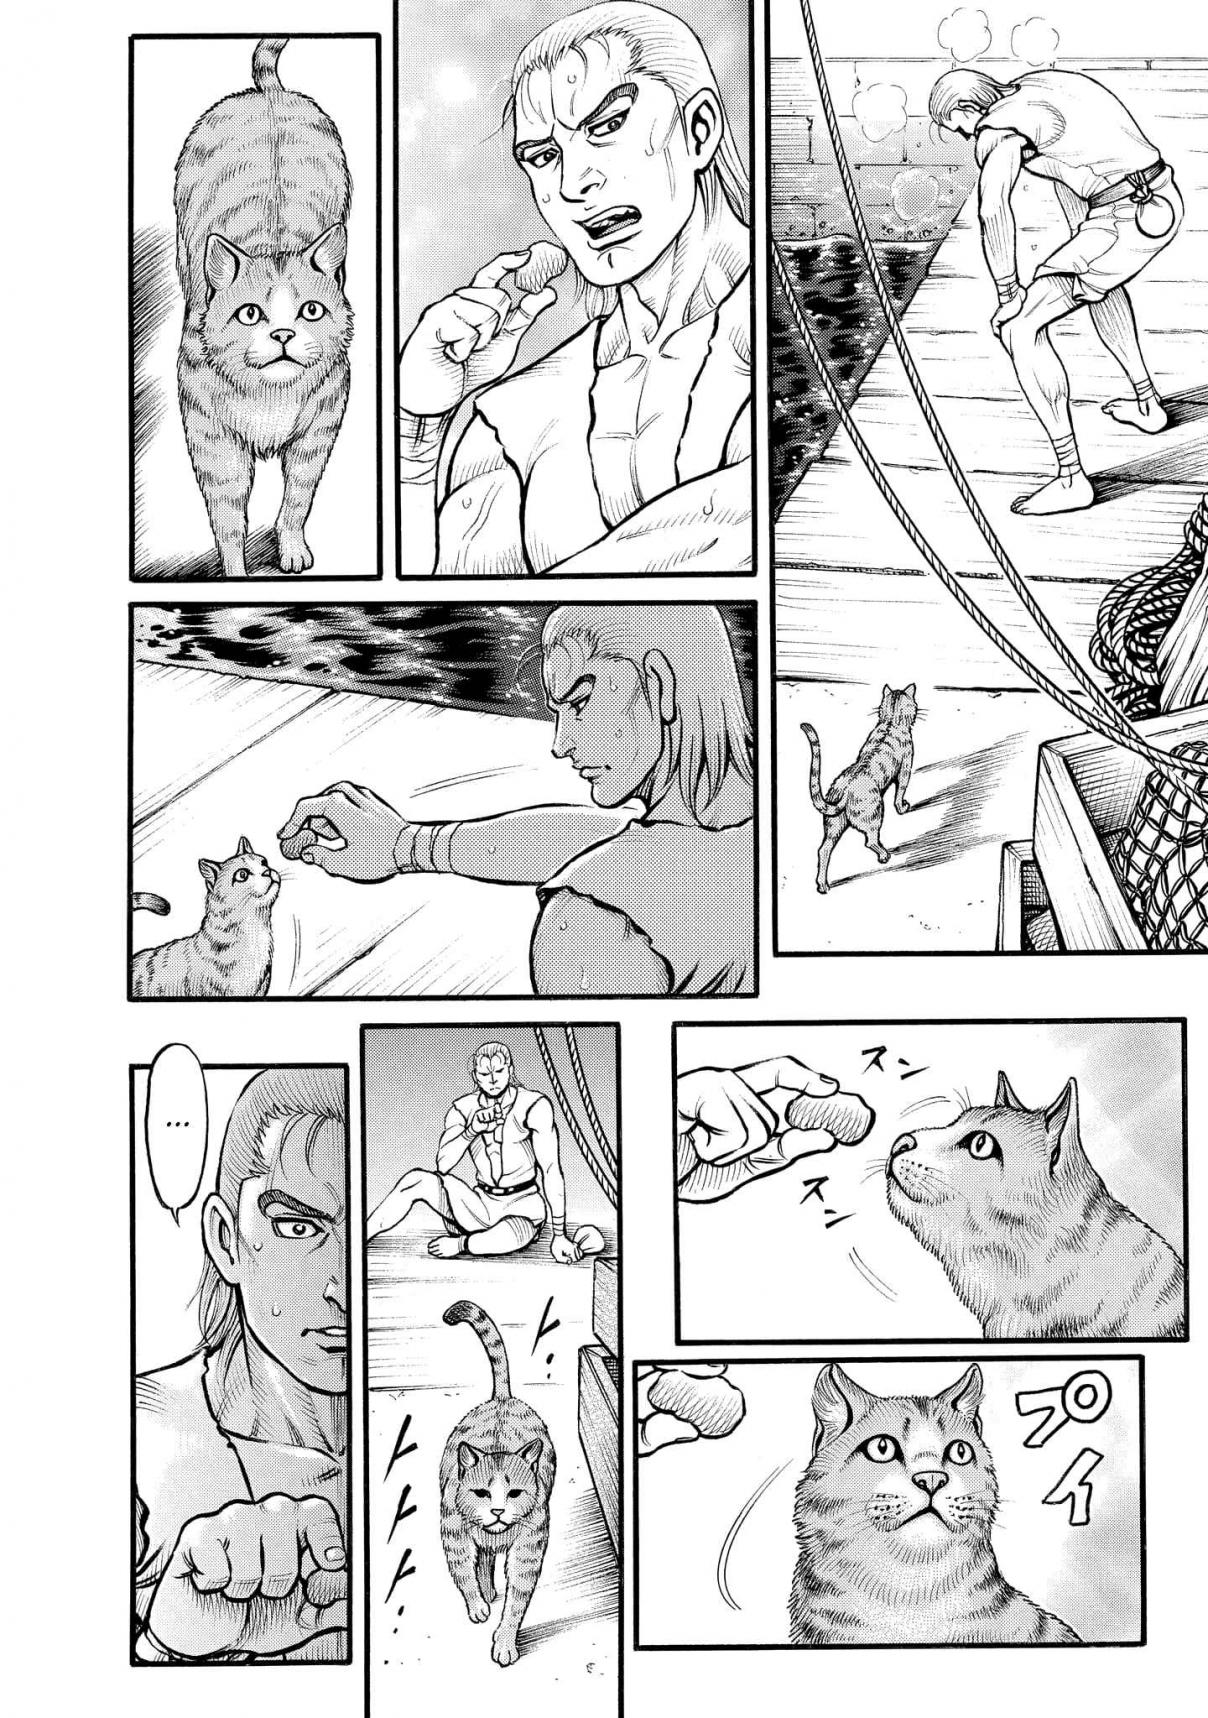 Kendo Shitouden Cestvs Vol. 8 Ch. 75 The Thoroughbred Horse and the Stray Dog